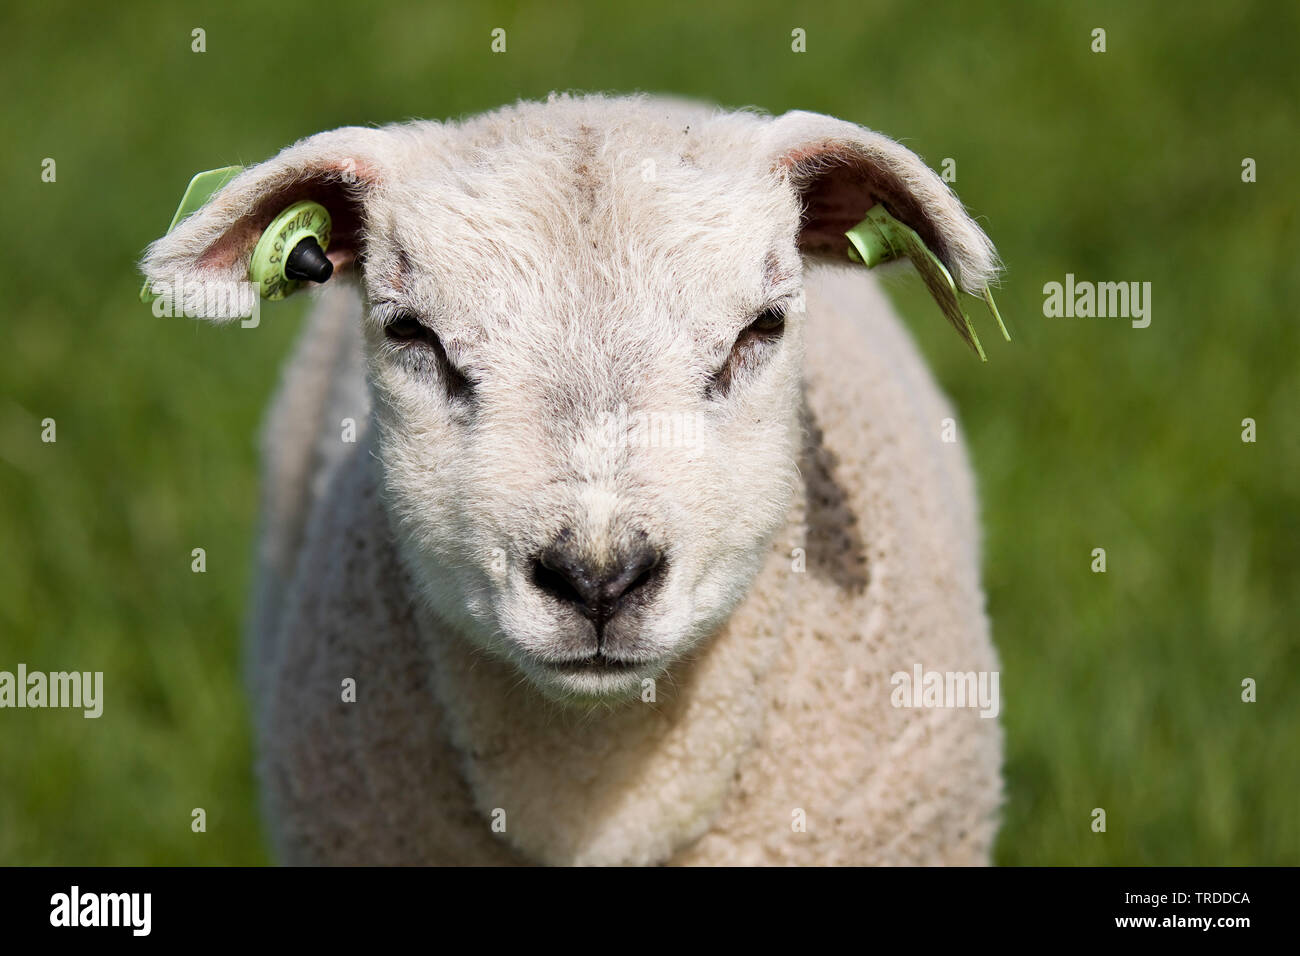 Texel sheep (Ovis ammon f. aries), lamb standing on a pasture, portrait, Netherlands, Texel Stock Photo